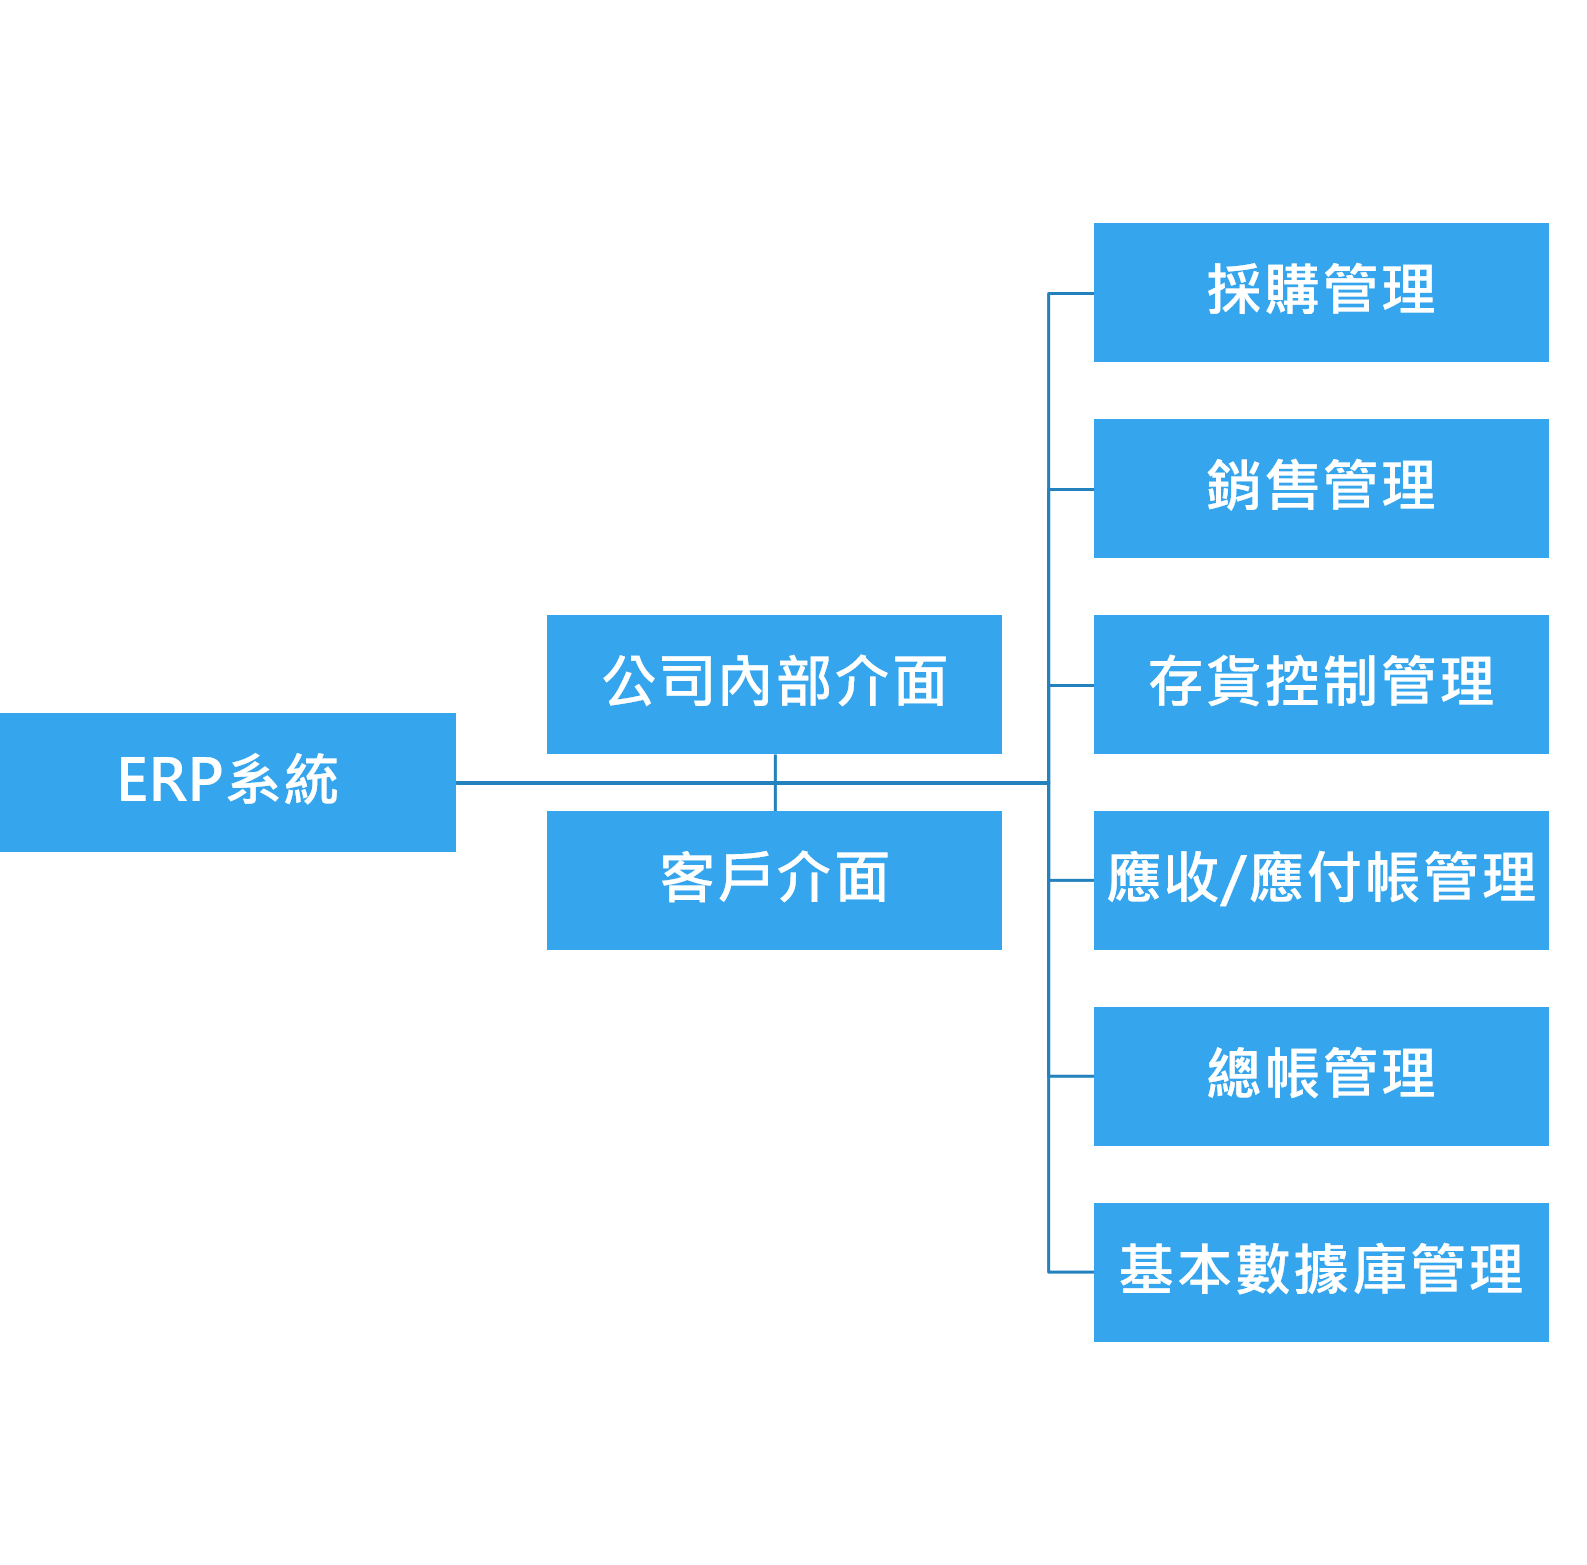 ERP system function